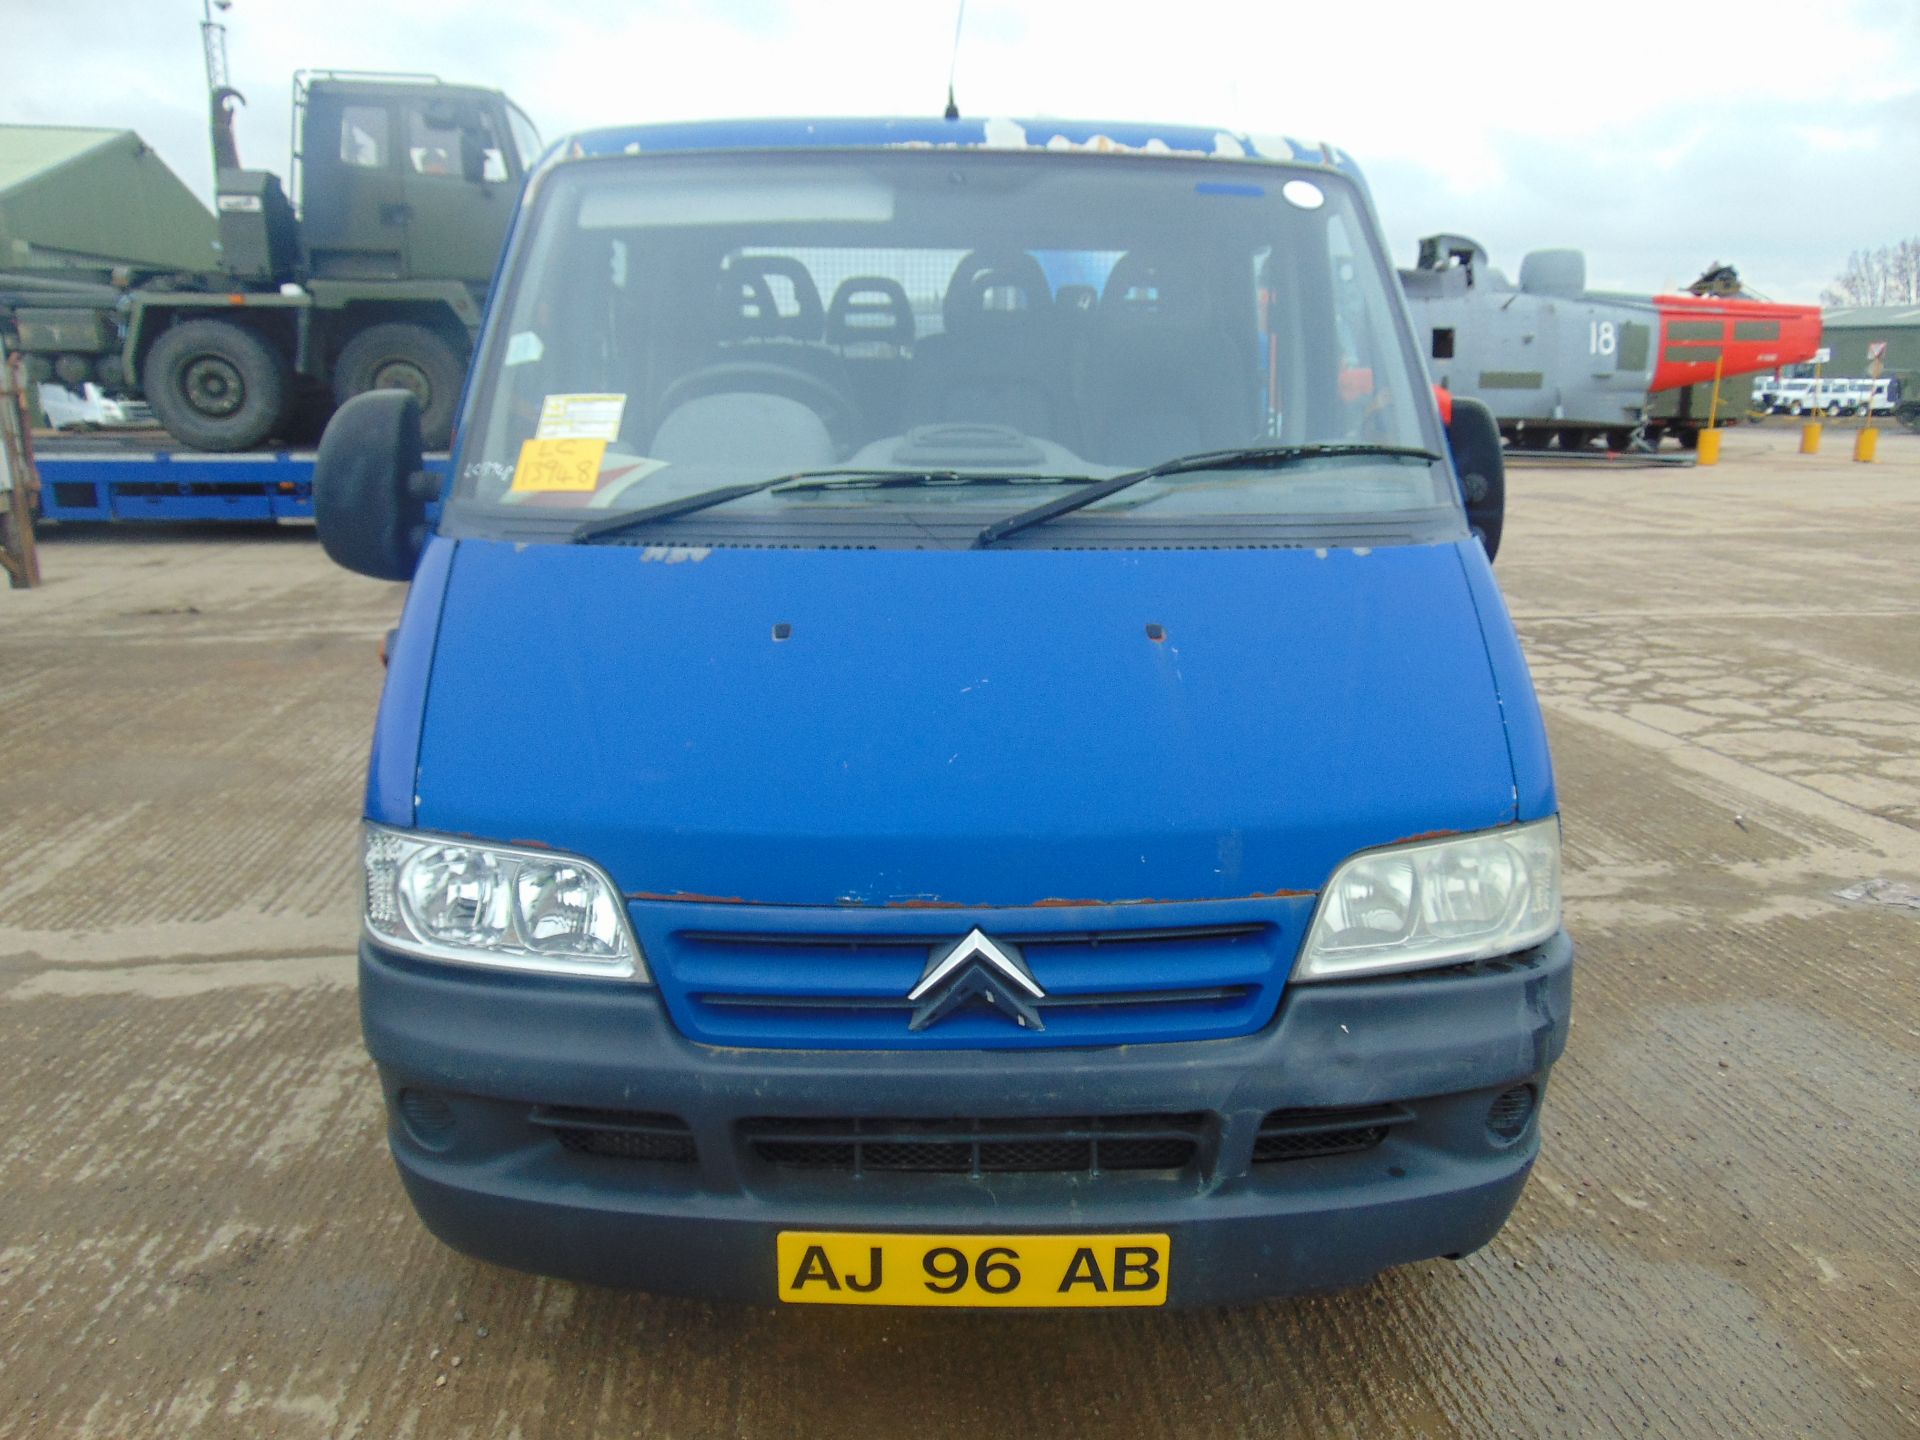 Citroen Relay 7 Seater Double Cab Dropside Pickupwith Tail Lift - Image 2 of 22